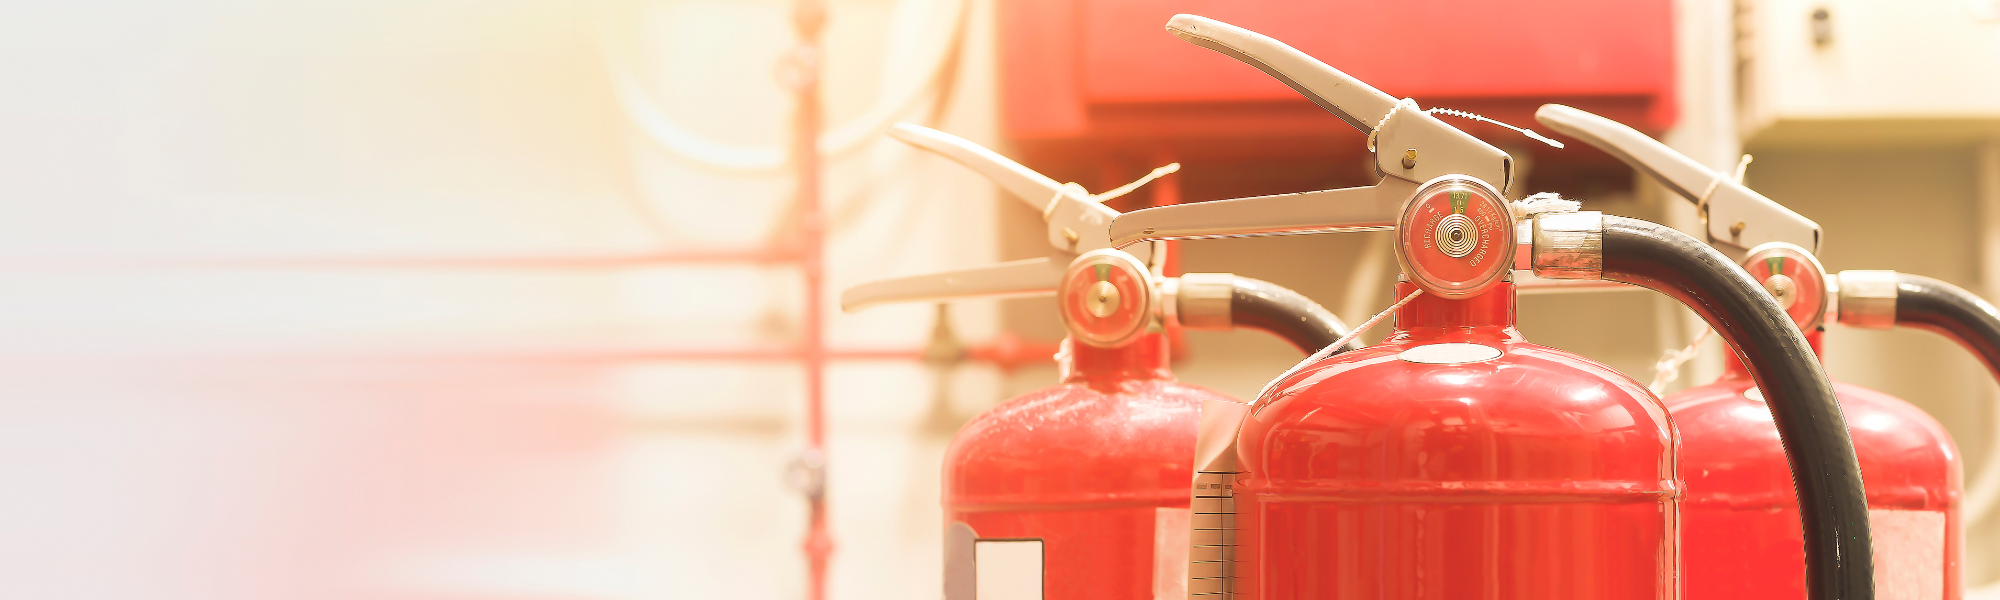 Professional Fire Auditors: Choosing the Right Experts for Your Business